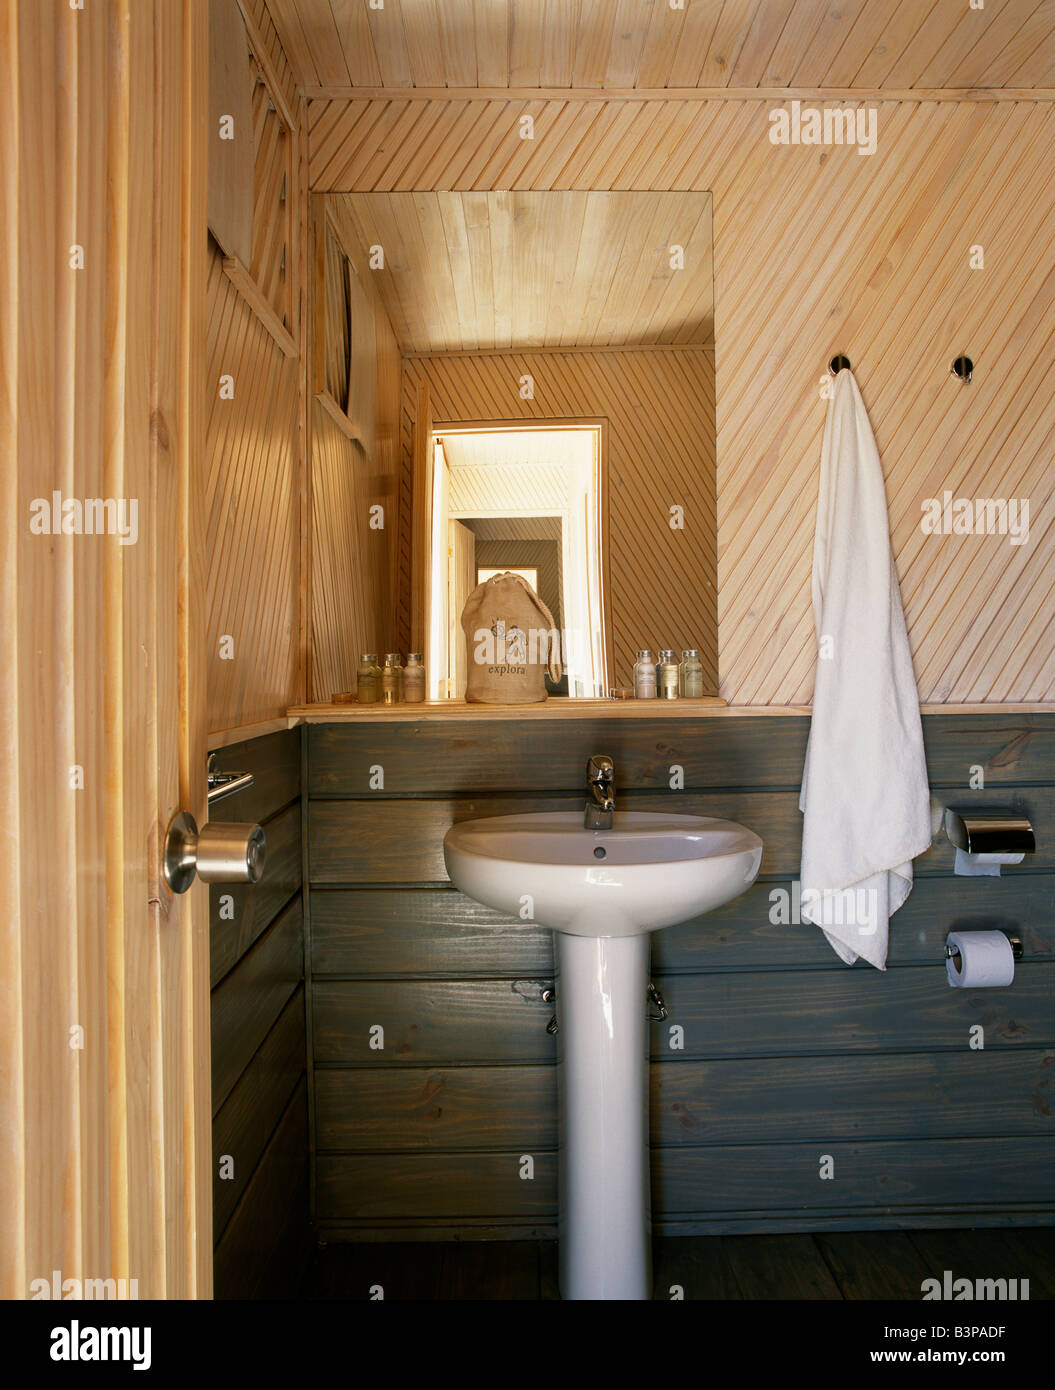 Chile, Parque Nacional Volcan Isluga. Camping in style. Interior of one of the bathrooms in the ablution block Stock Photo